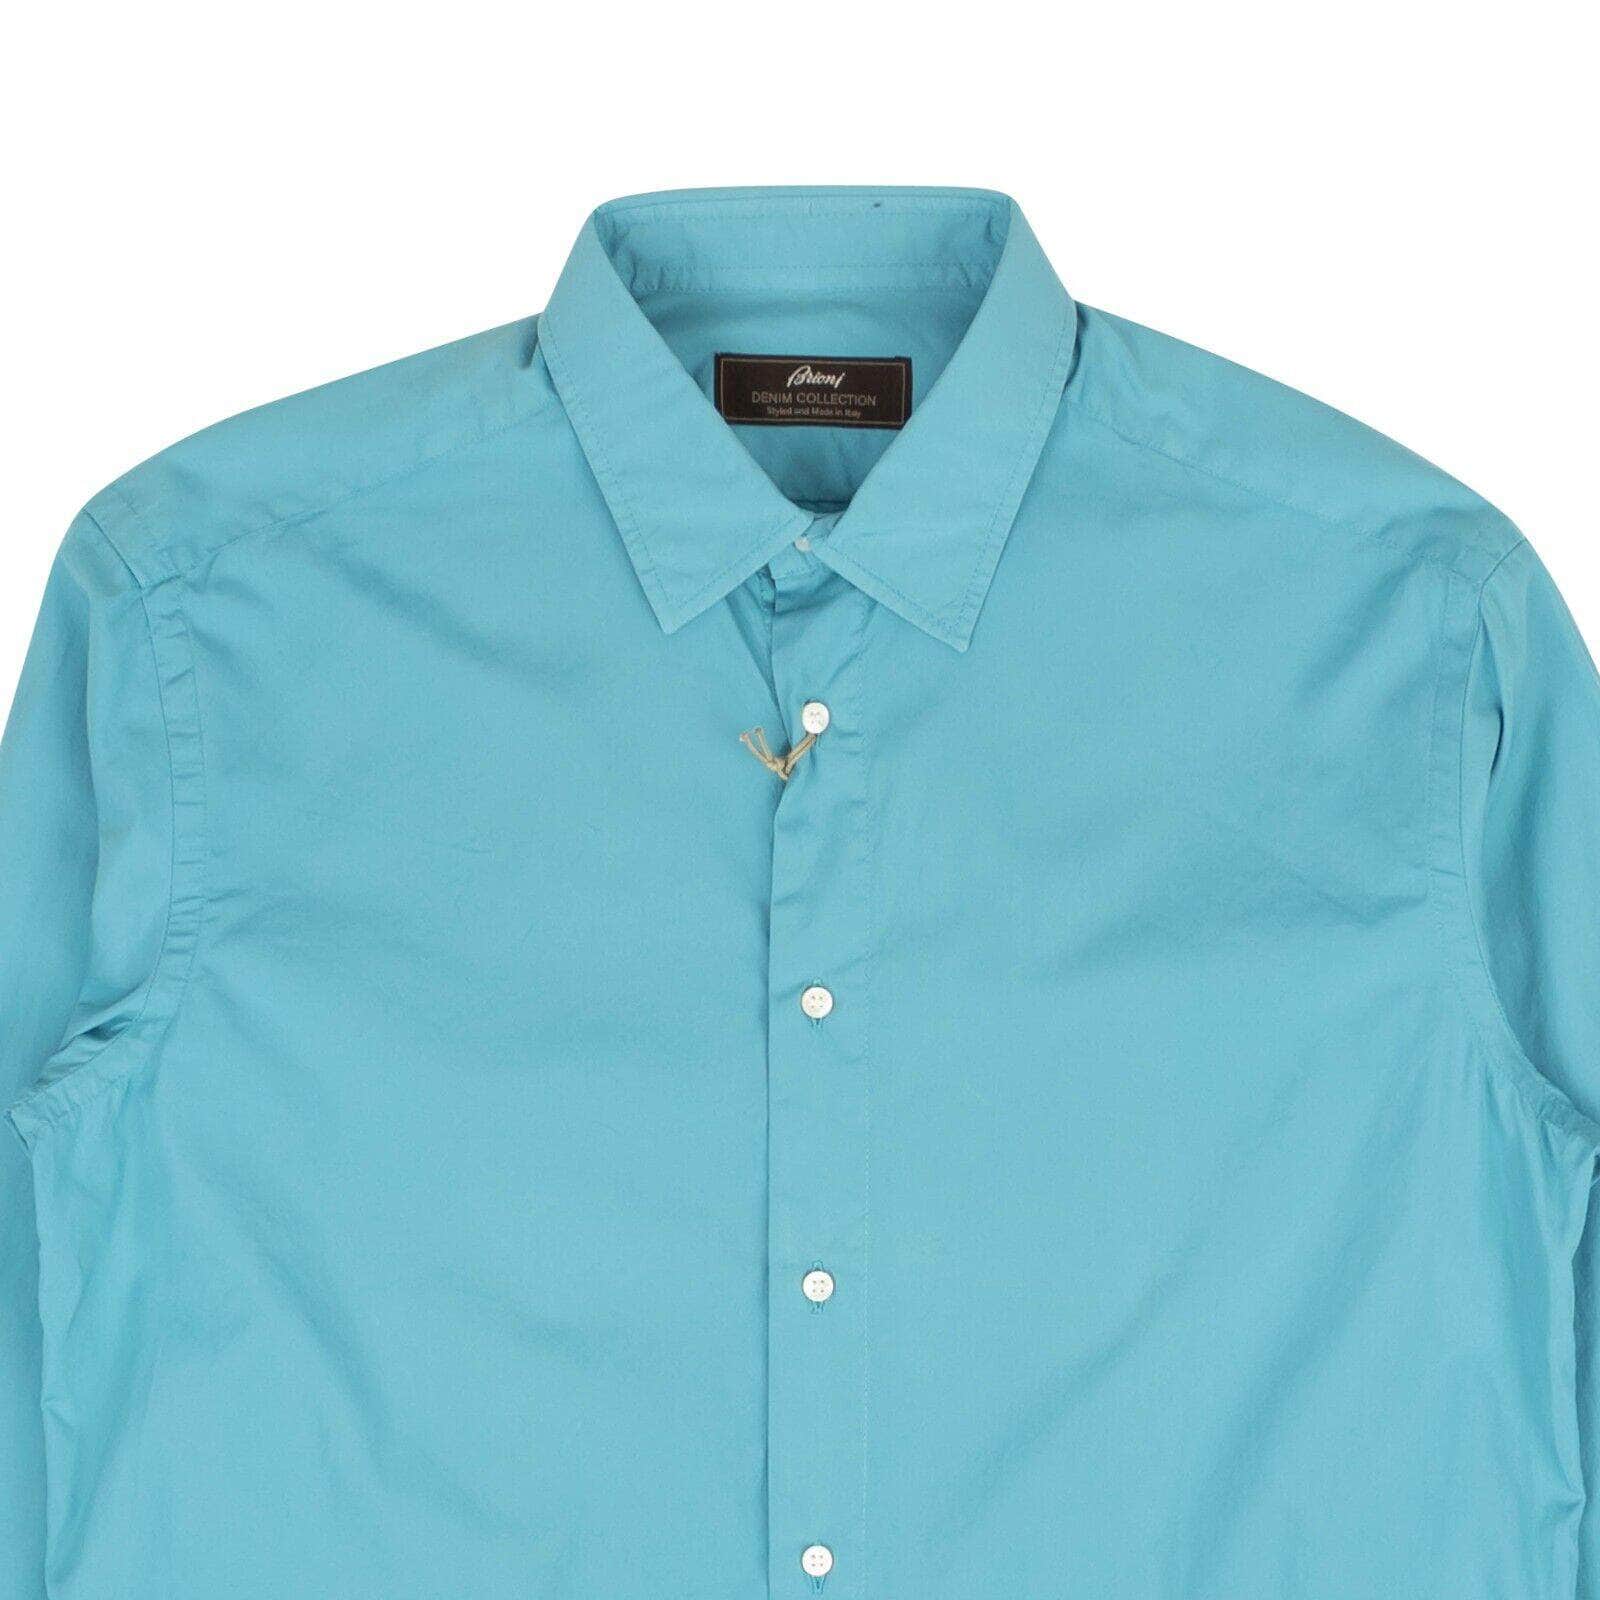 Brioni 250-500, channelenable-all, chicmi, couponcollection, gender-mens, main-clothing, mens-shoes, size-3 3 Teal Blue Slim-Fit Long Sleeve Cotton Casual Shirt 95-BNI-1003/3 95-BNI-1003/3